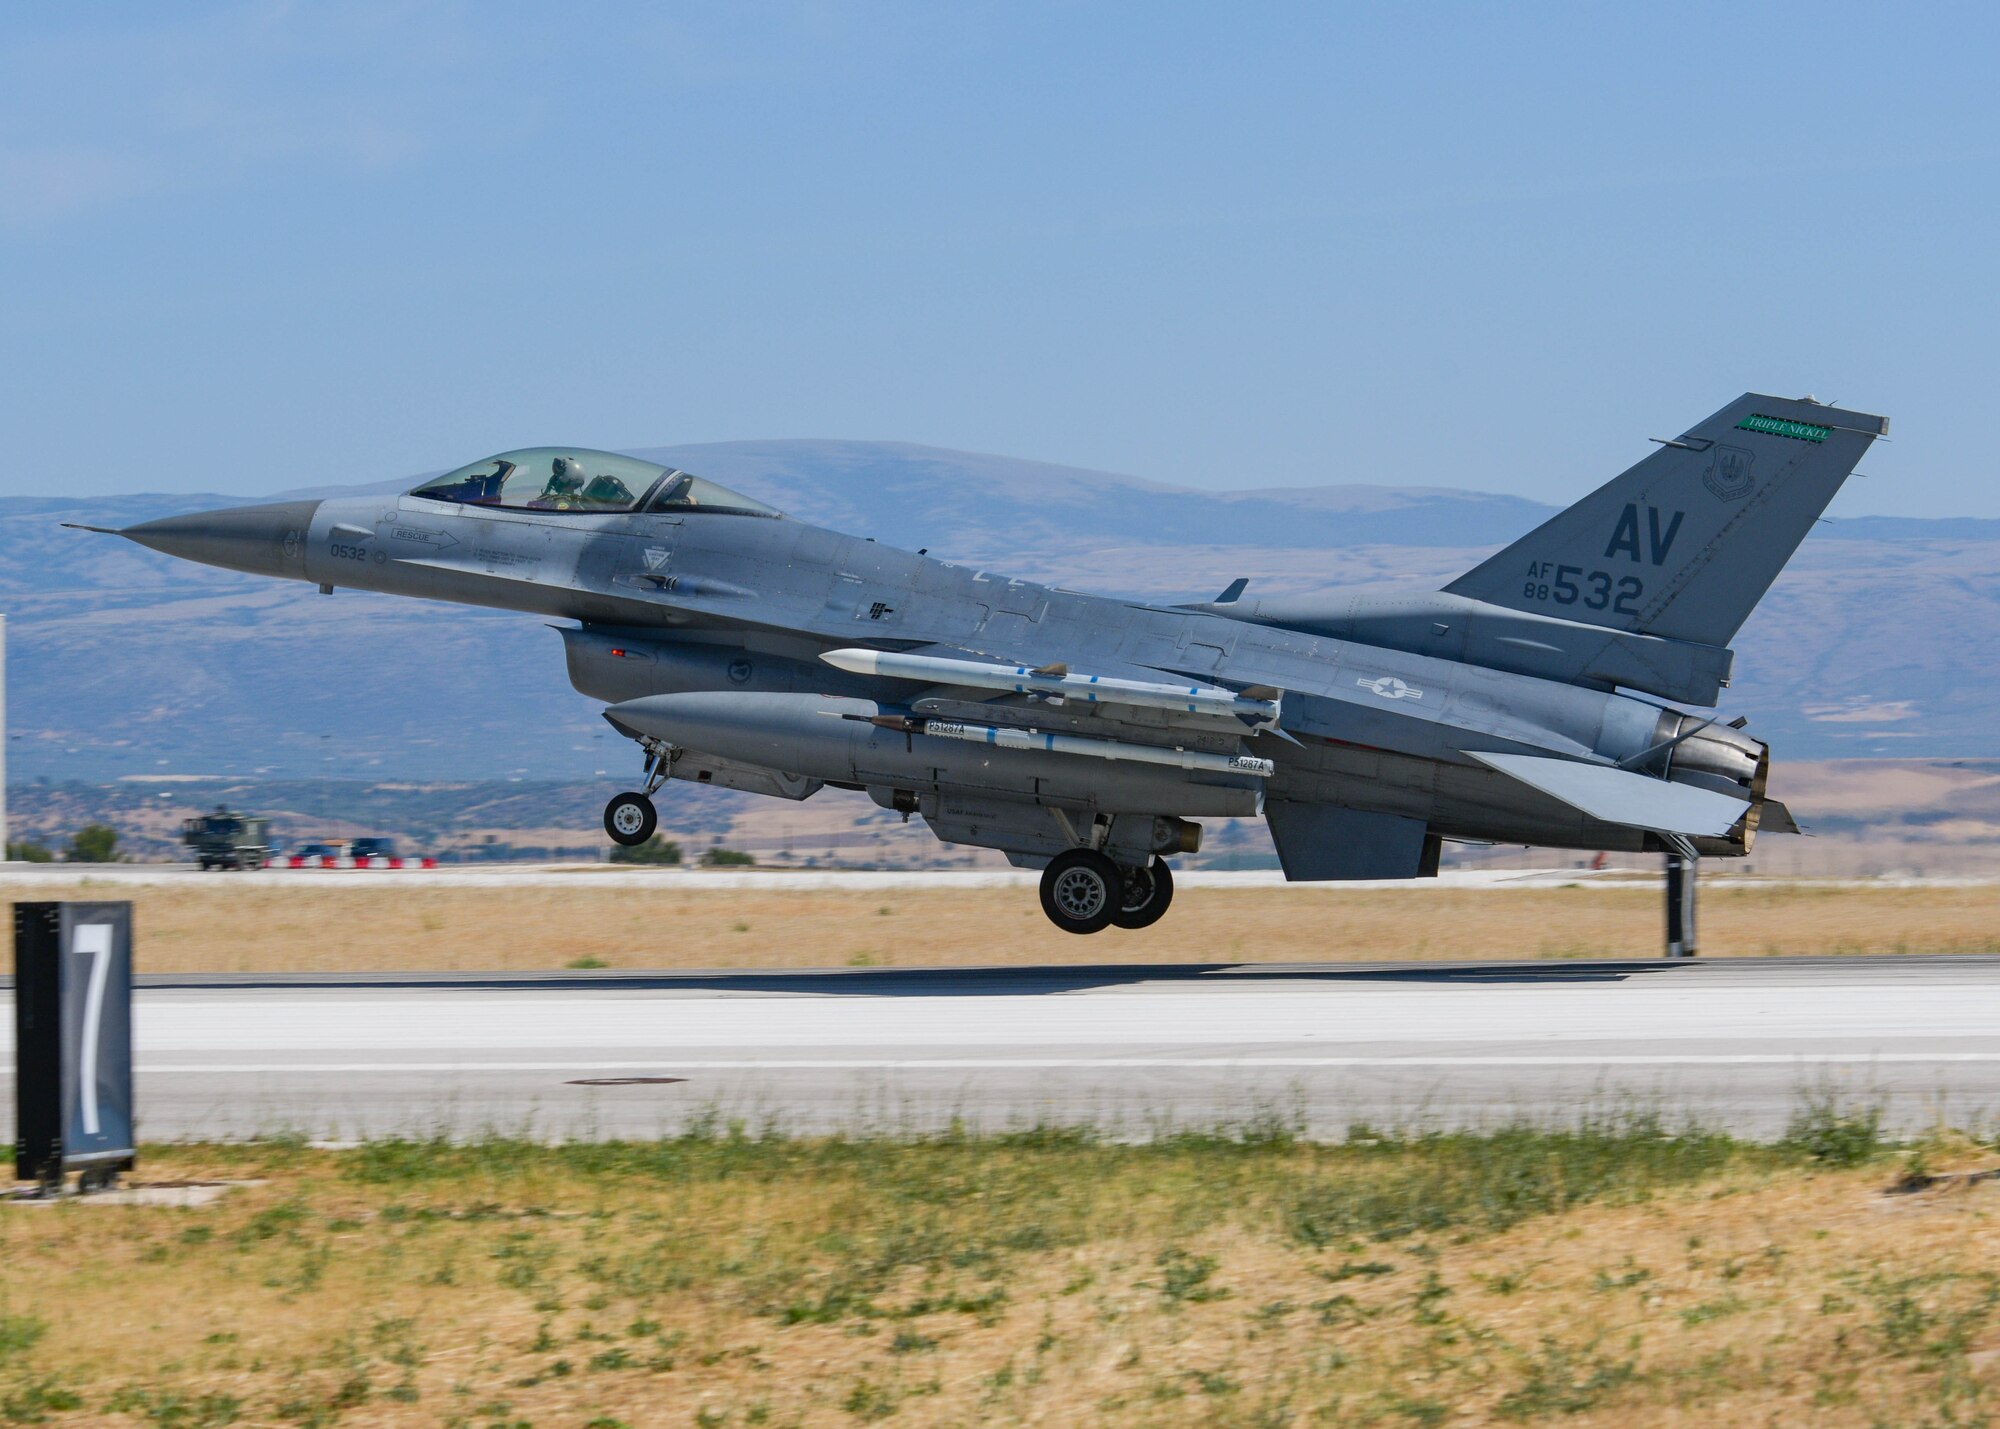 A U.S. Air Force  F-16C Fighting Falcon assigned to the 555th Fighter Squadron participating in Falcon Strike 21 (FS21) lands at Amendola Air Base, Italy, June 4, 2021. Six F-16C aircraft are participating in FS21, an exercise involving service members from the U.S., Israel, Italy and the United Kingdom to integrate fourth  and fifth generation fighter capabilities in a large force employment event. FS21 builds upon nations’ joint capabilities, ensuring a stronger partnership and enhanced interoperability. (U.S. Air Force photo by Airman 1st Class Brooke Moeder)